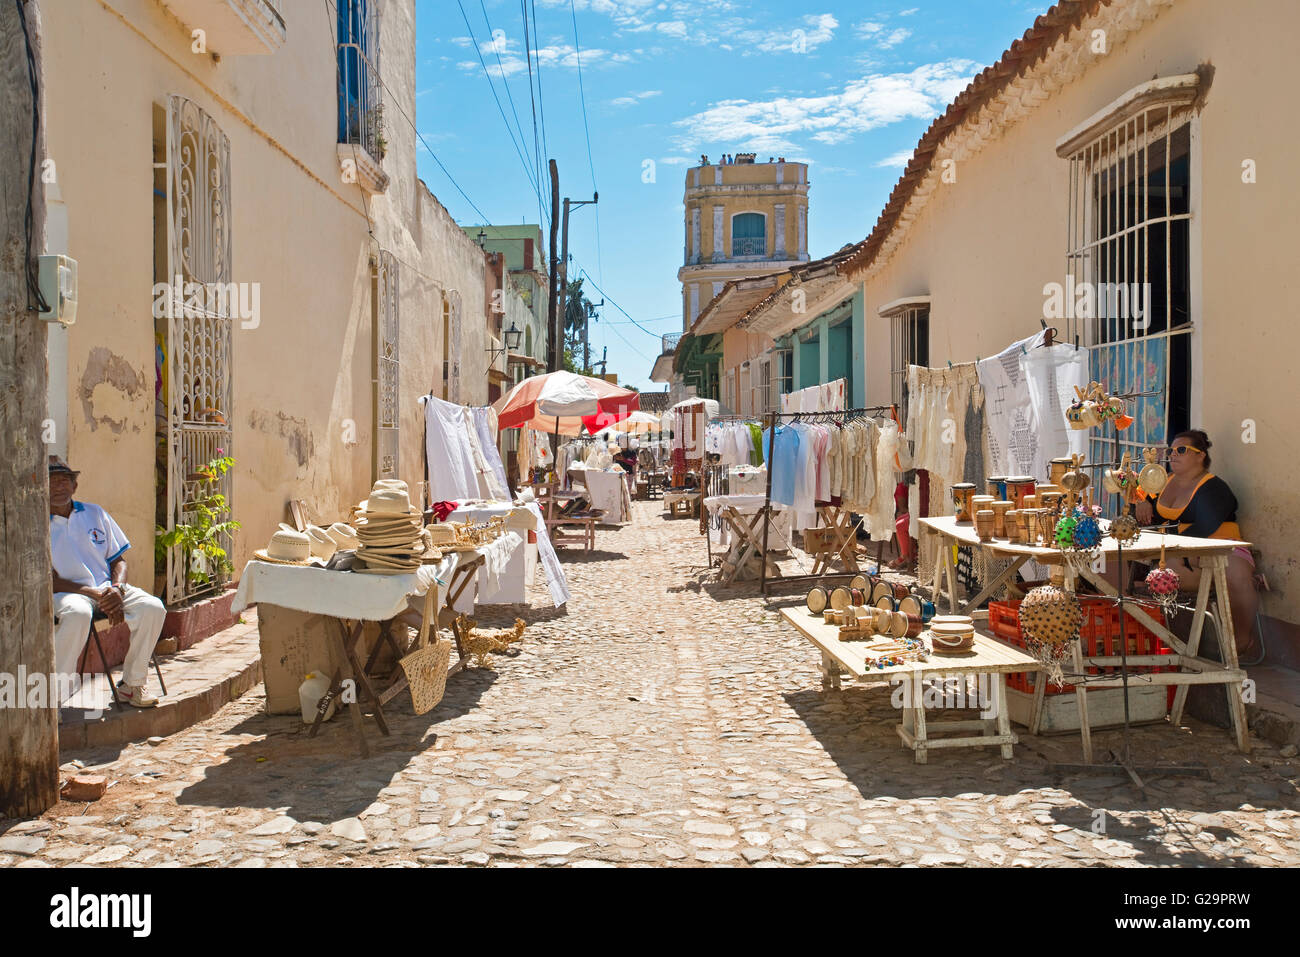 Typical colourful street road market scene near the center of Trinidad in Cuba with local people selling tourist items. Stock Photo